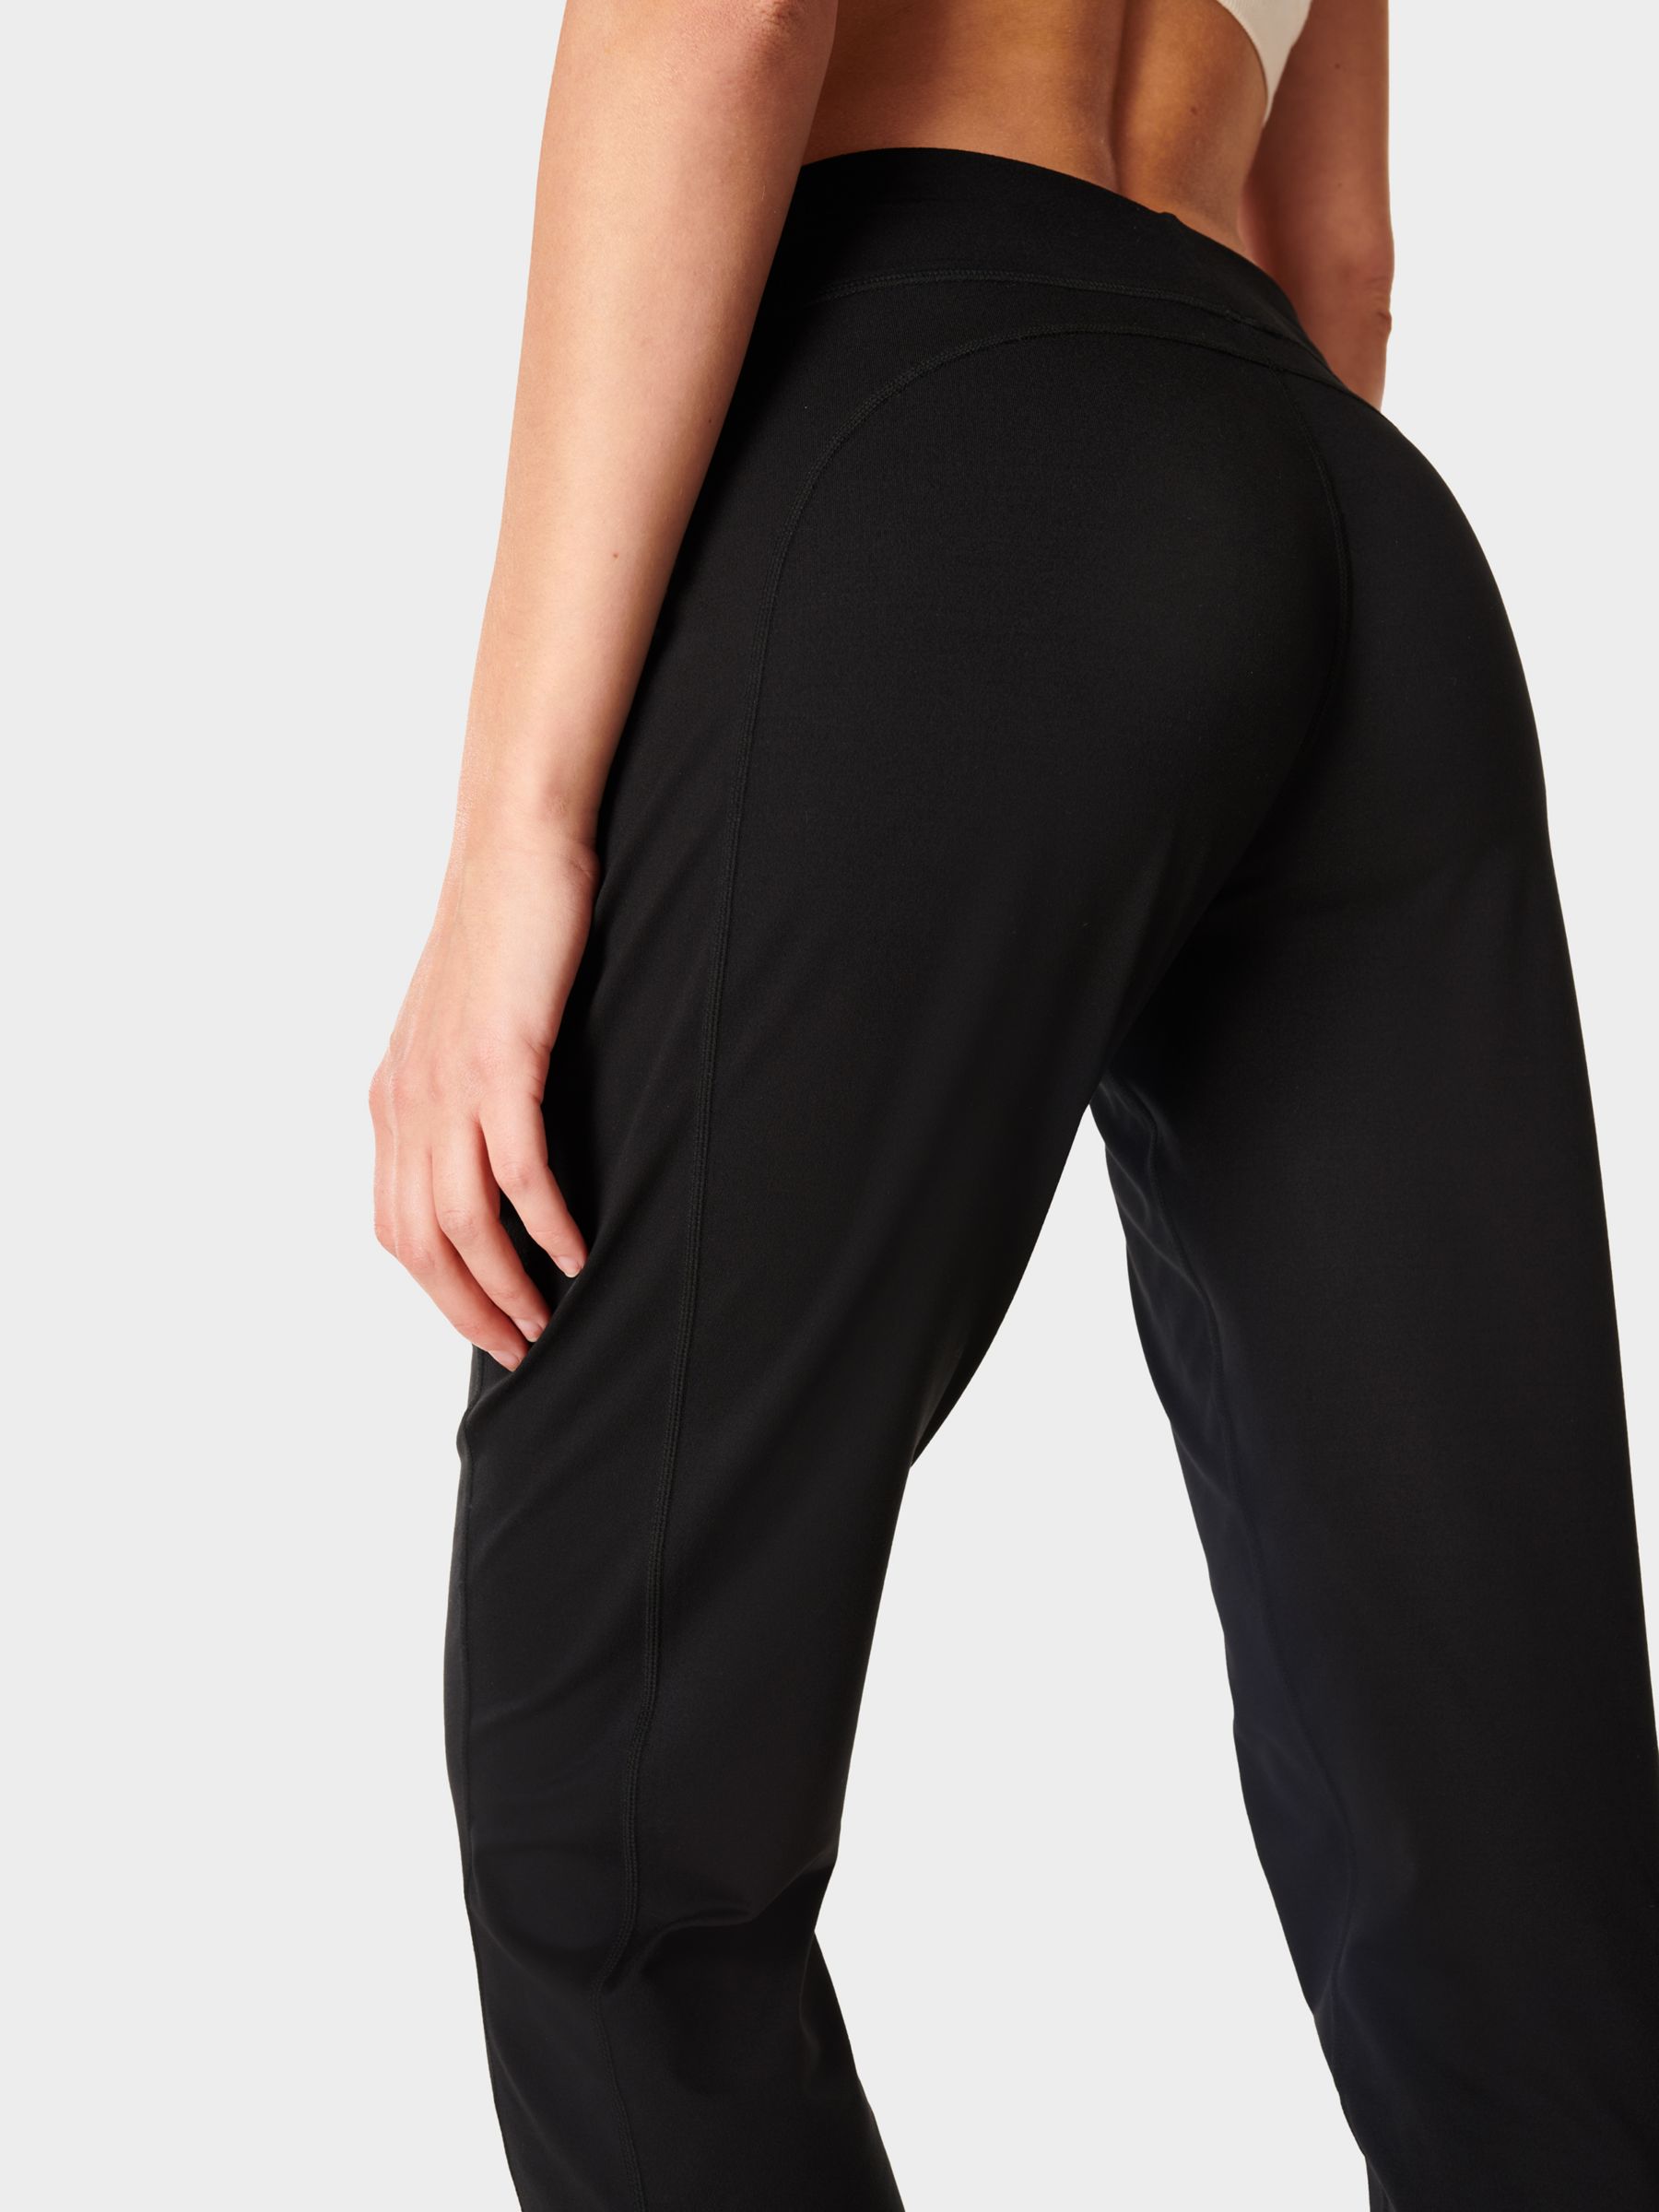 VICUR Women's Flare Yoga Pants V Crossover High Waisted Yoga Pants